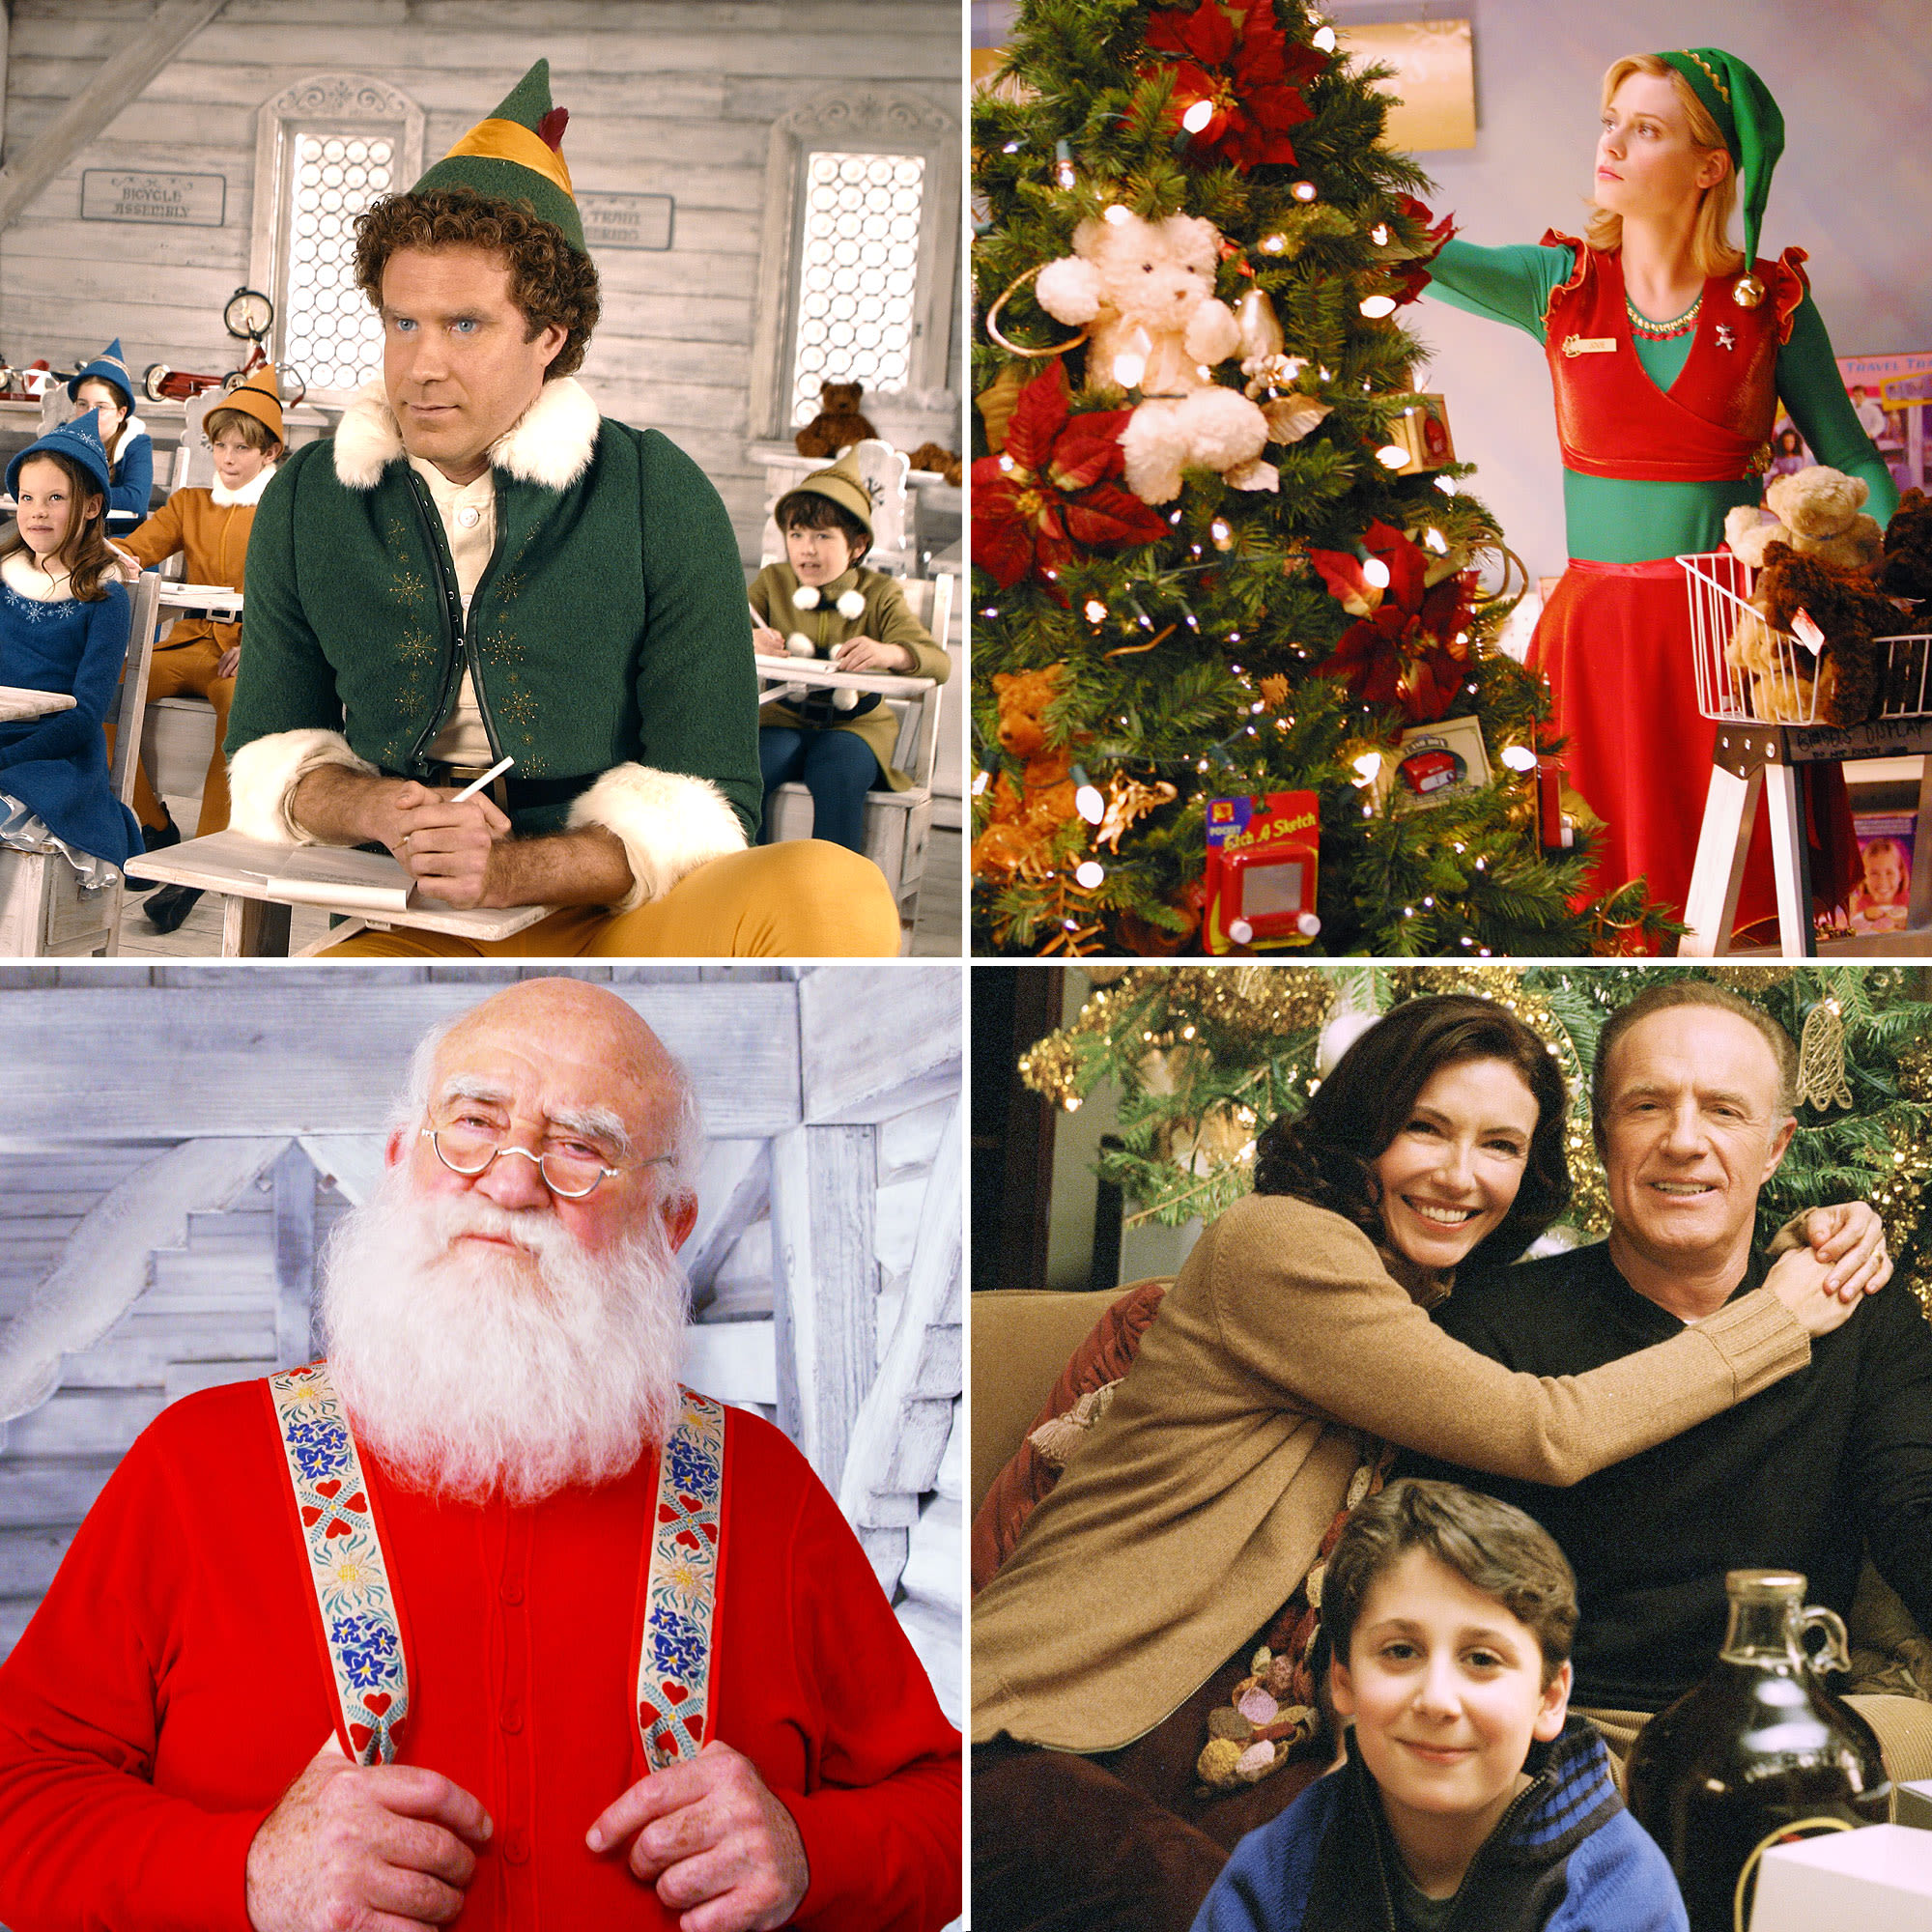 ‘Elf’ Cast: Where Are They Now? Will Ferrell, Zooey Deschanel and More